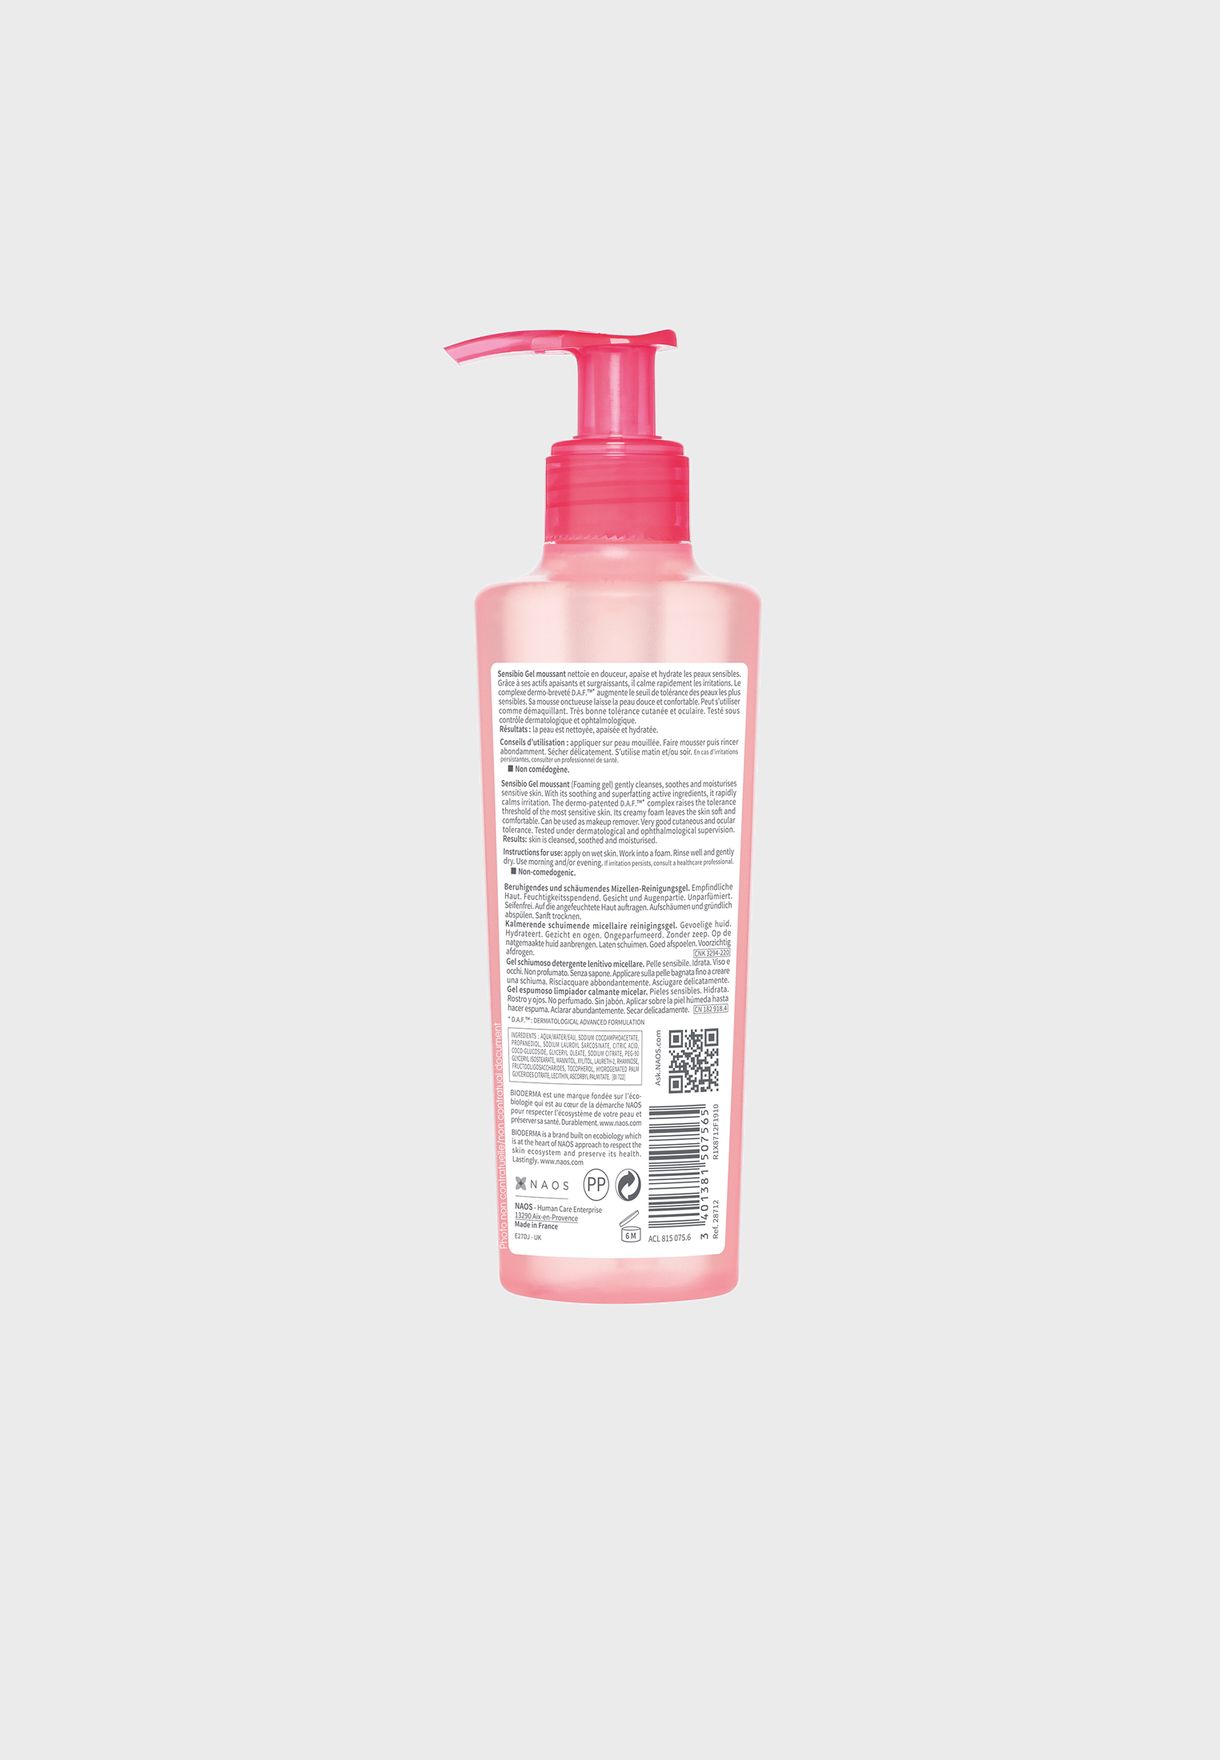 Sensibio Moussant Soothing Cleansing Gel